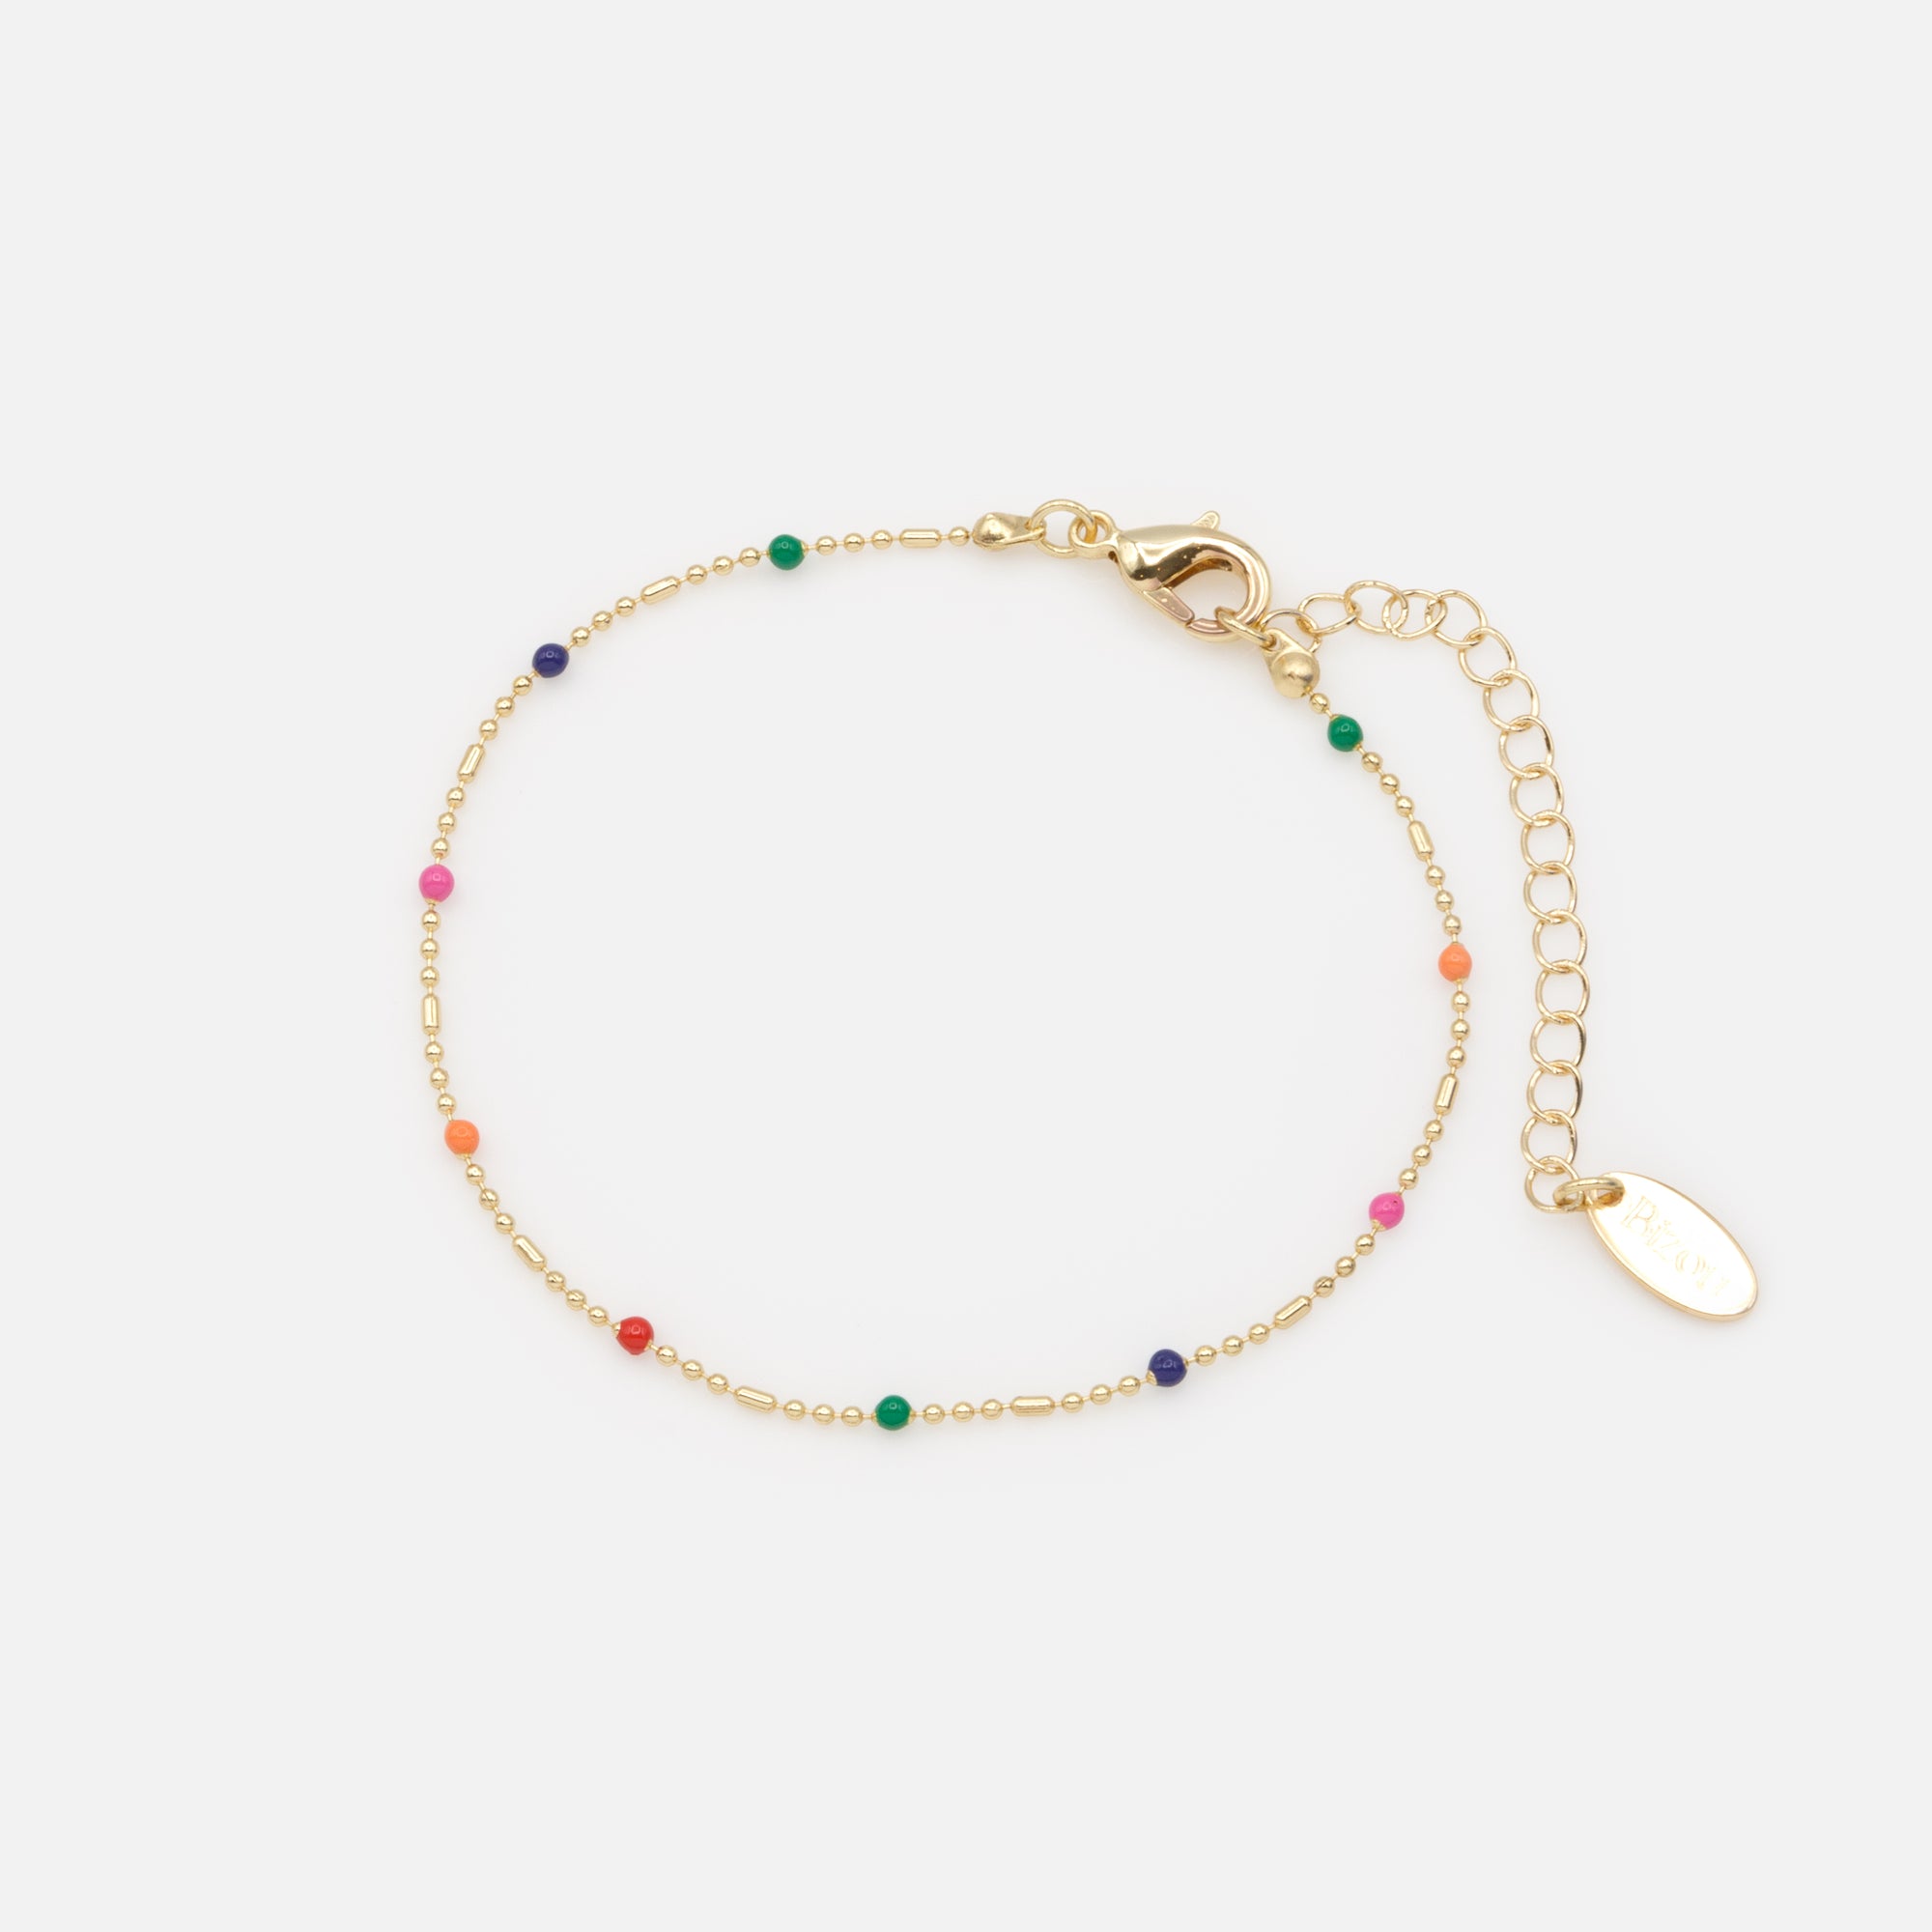 Delicate golden bracelet with colored beads